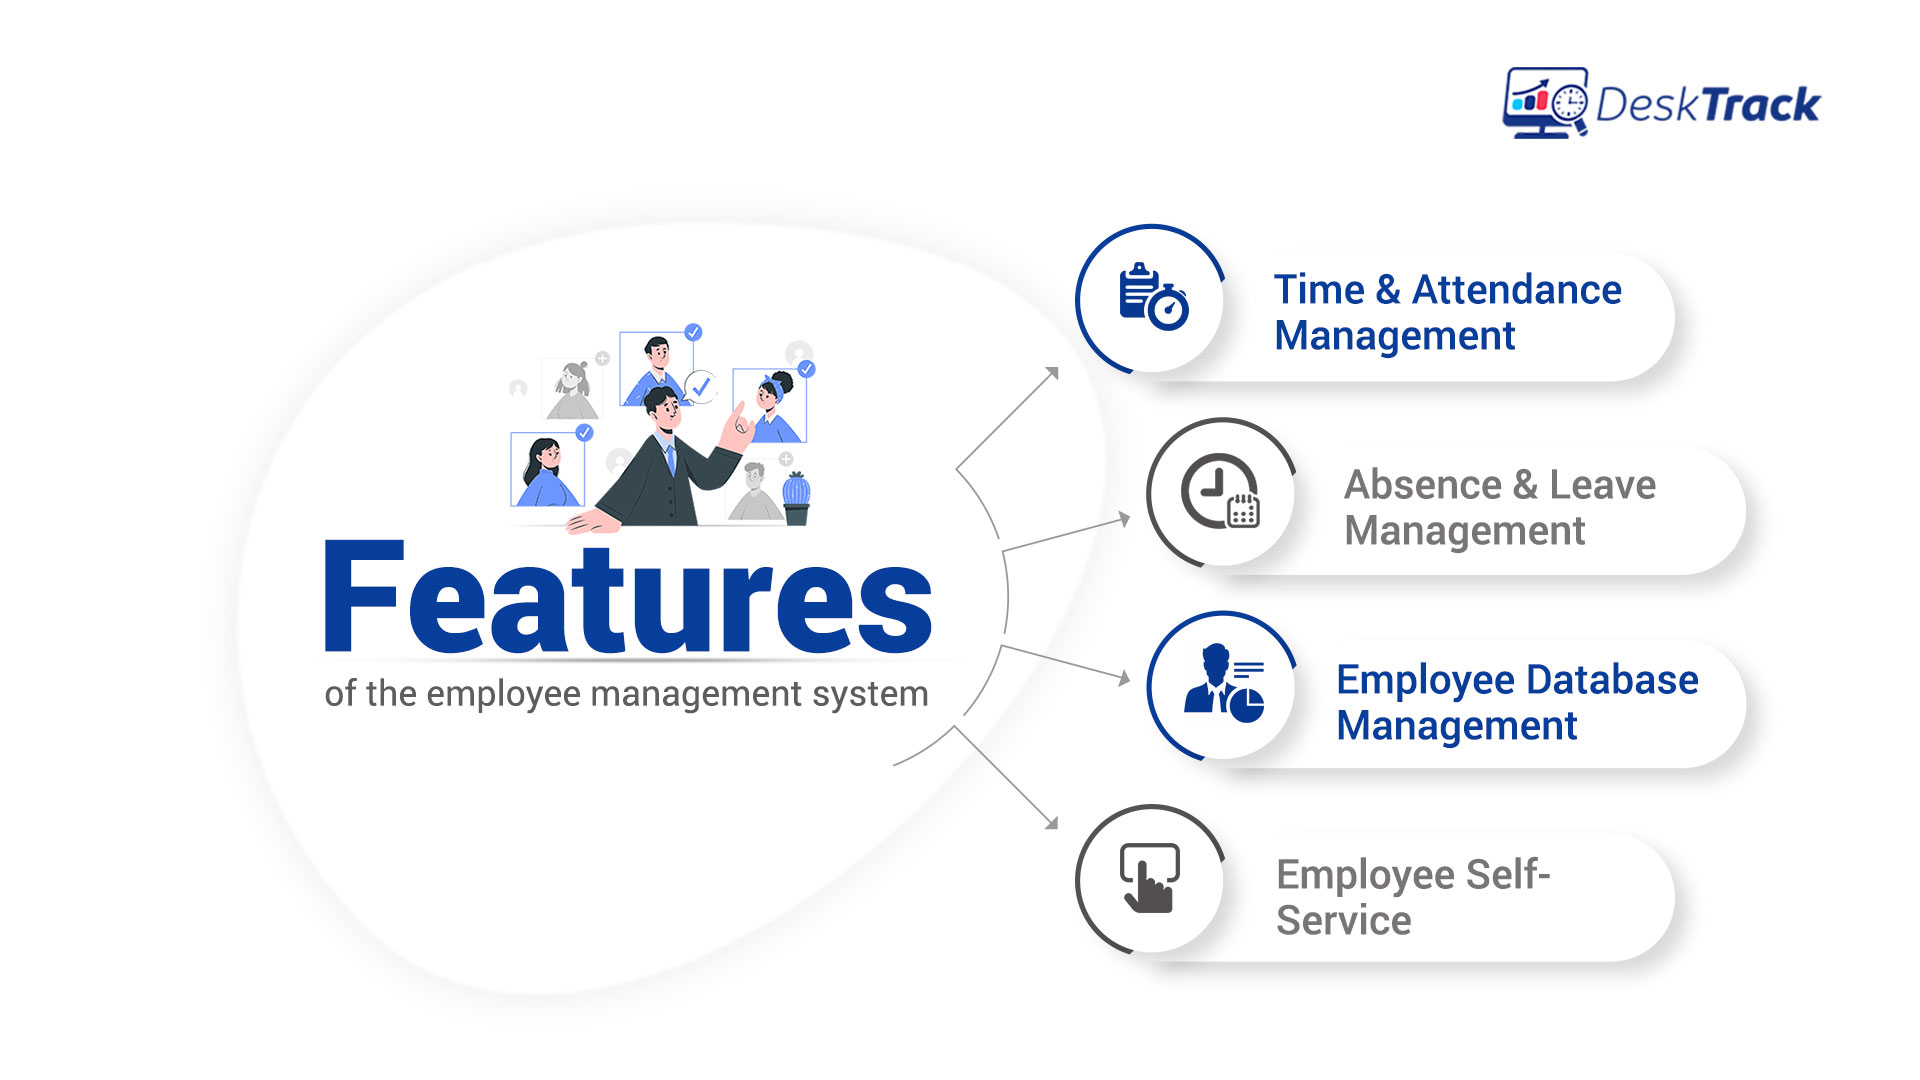 Features of the employee management system